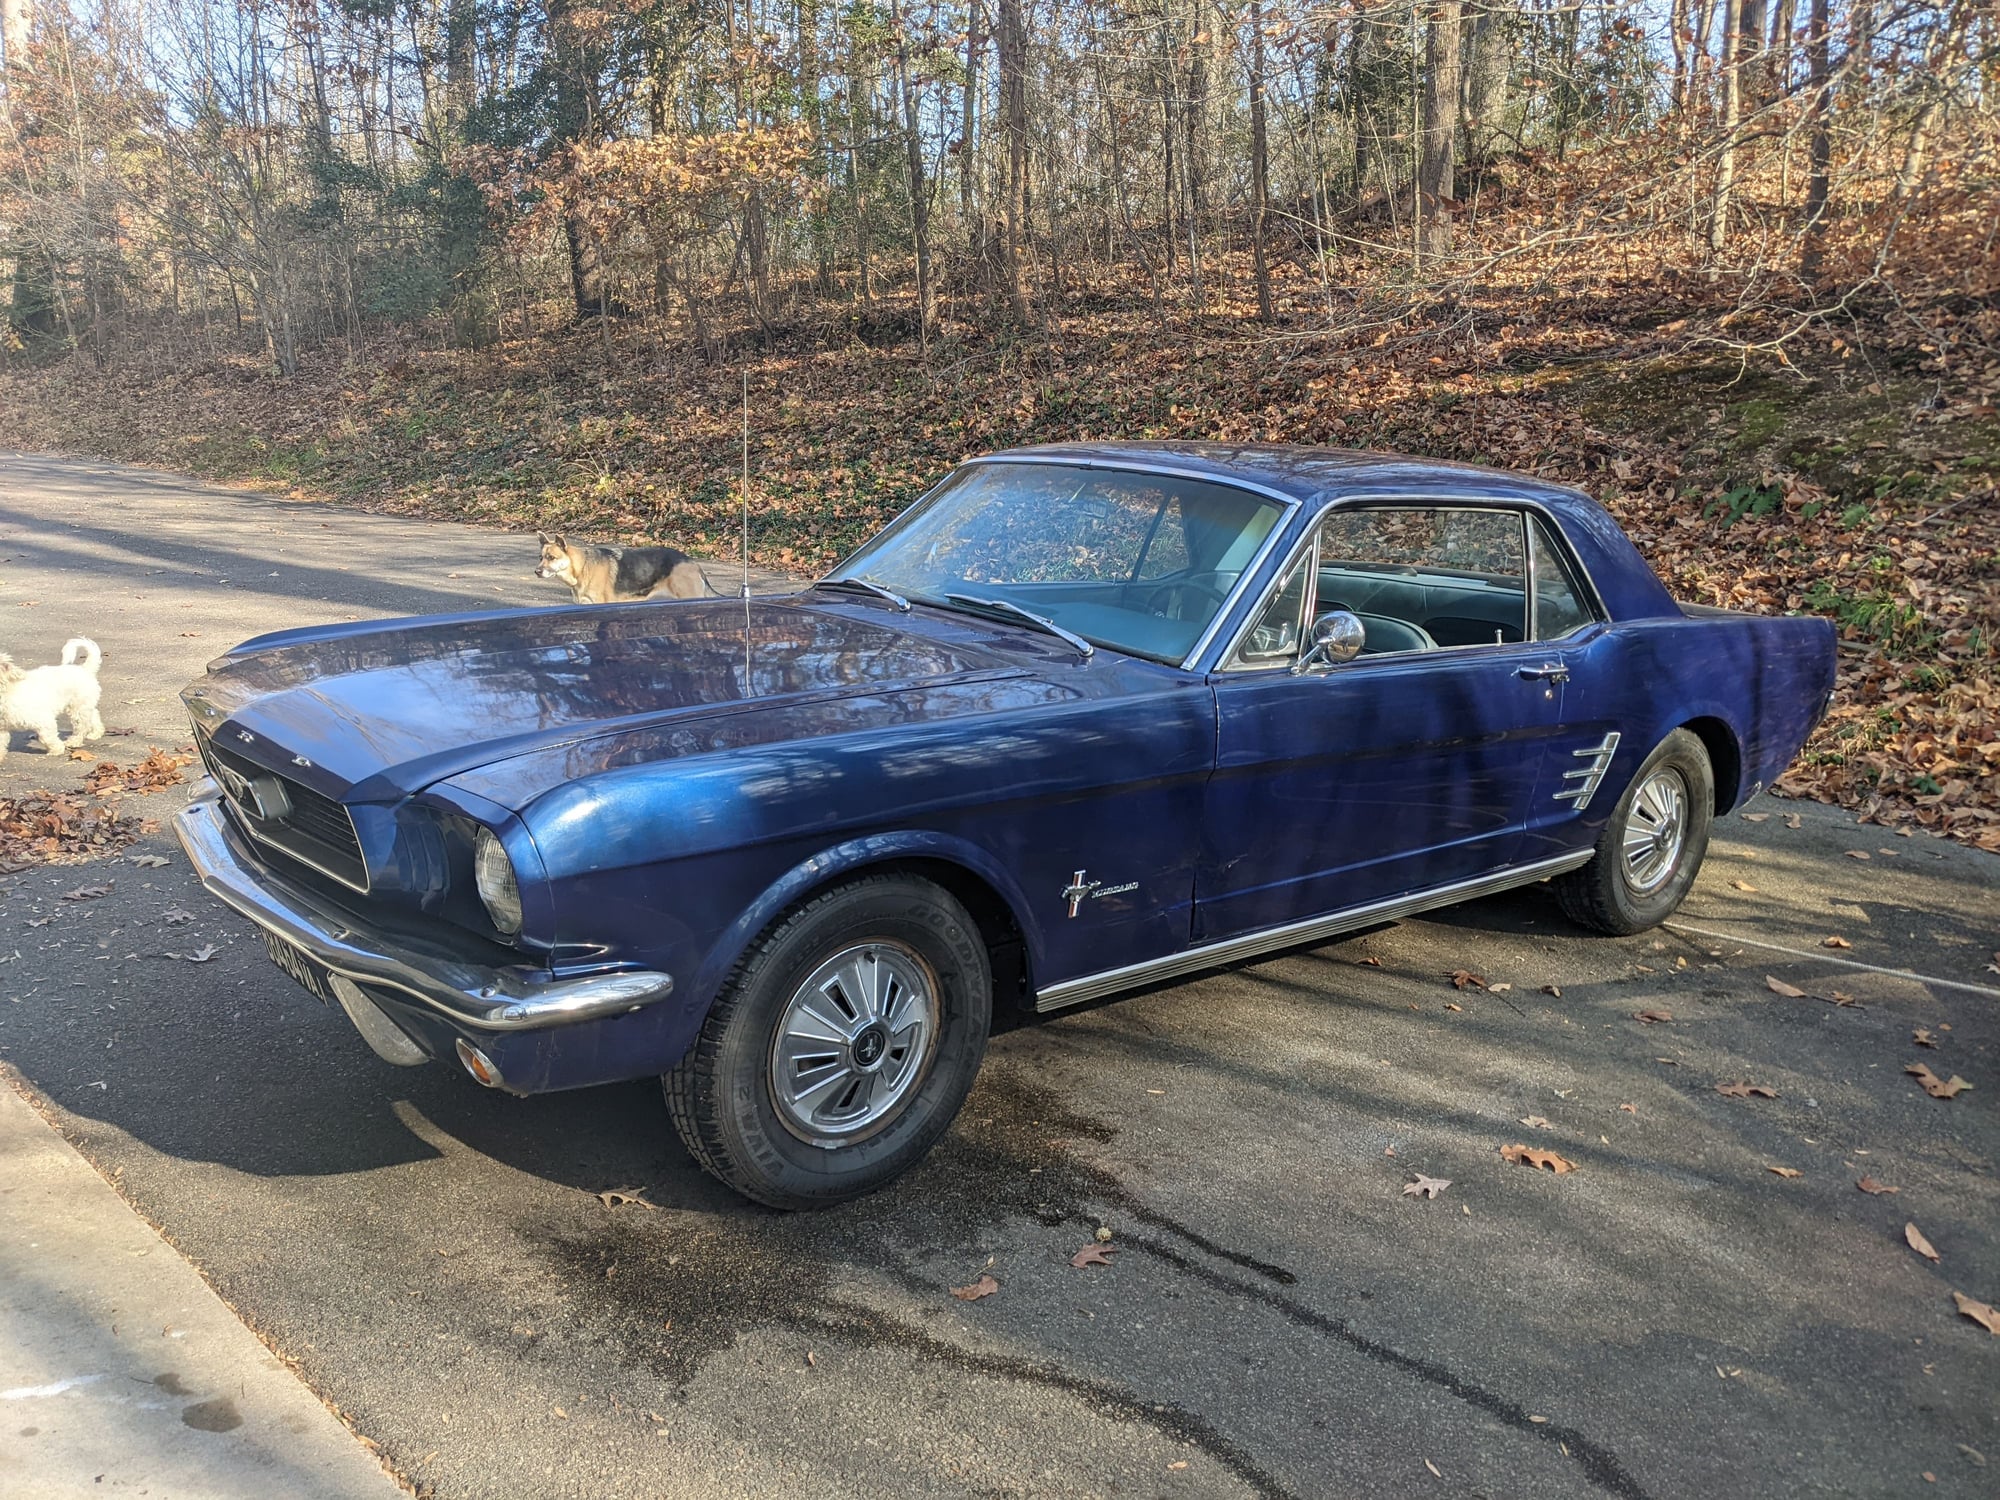 1966 Ford Mustang - 1966 Mustang Coupe $7000 - Used - VIN 6T07T109454 - 46,764 Miles - 6 cyl - 2WD - Automatic - Coupe - Blue - King George, VA 22485, United States